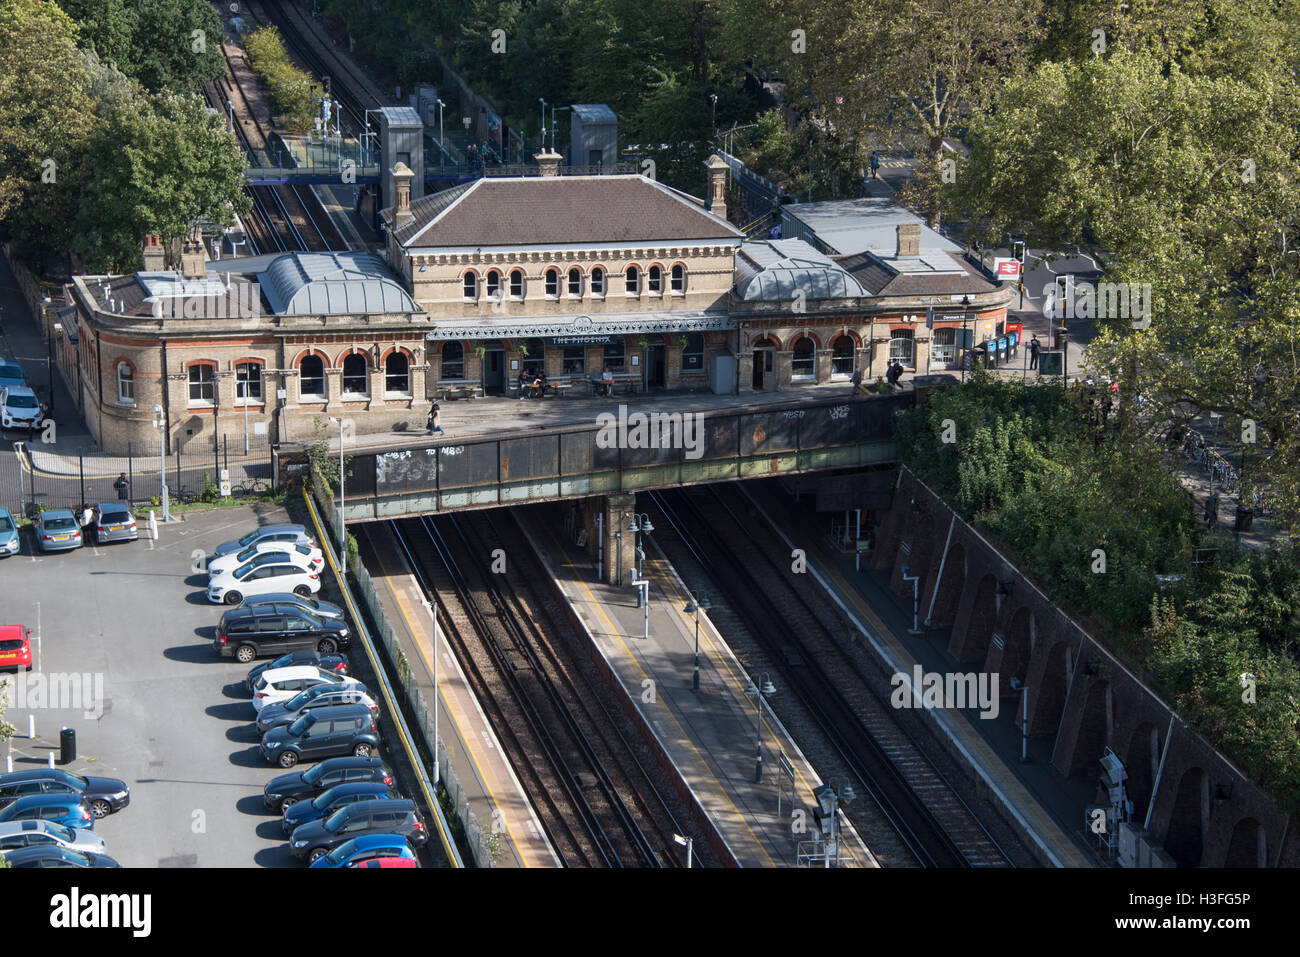 The traditional Victorian train station of Denmark Hill in south London as seen from above Stock Photo